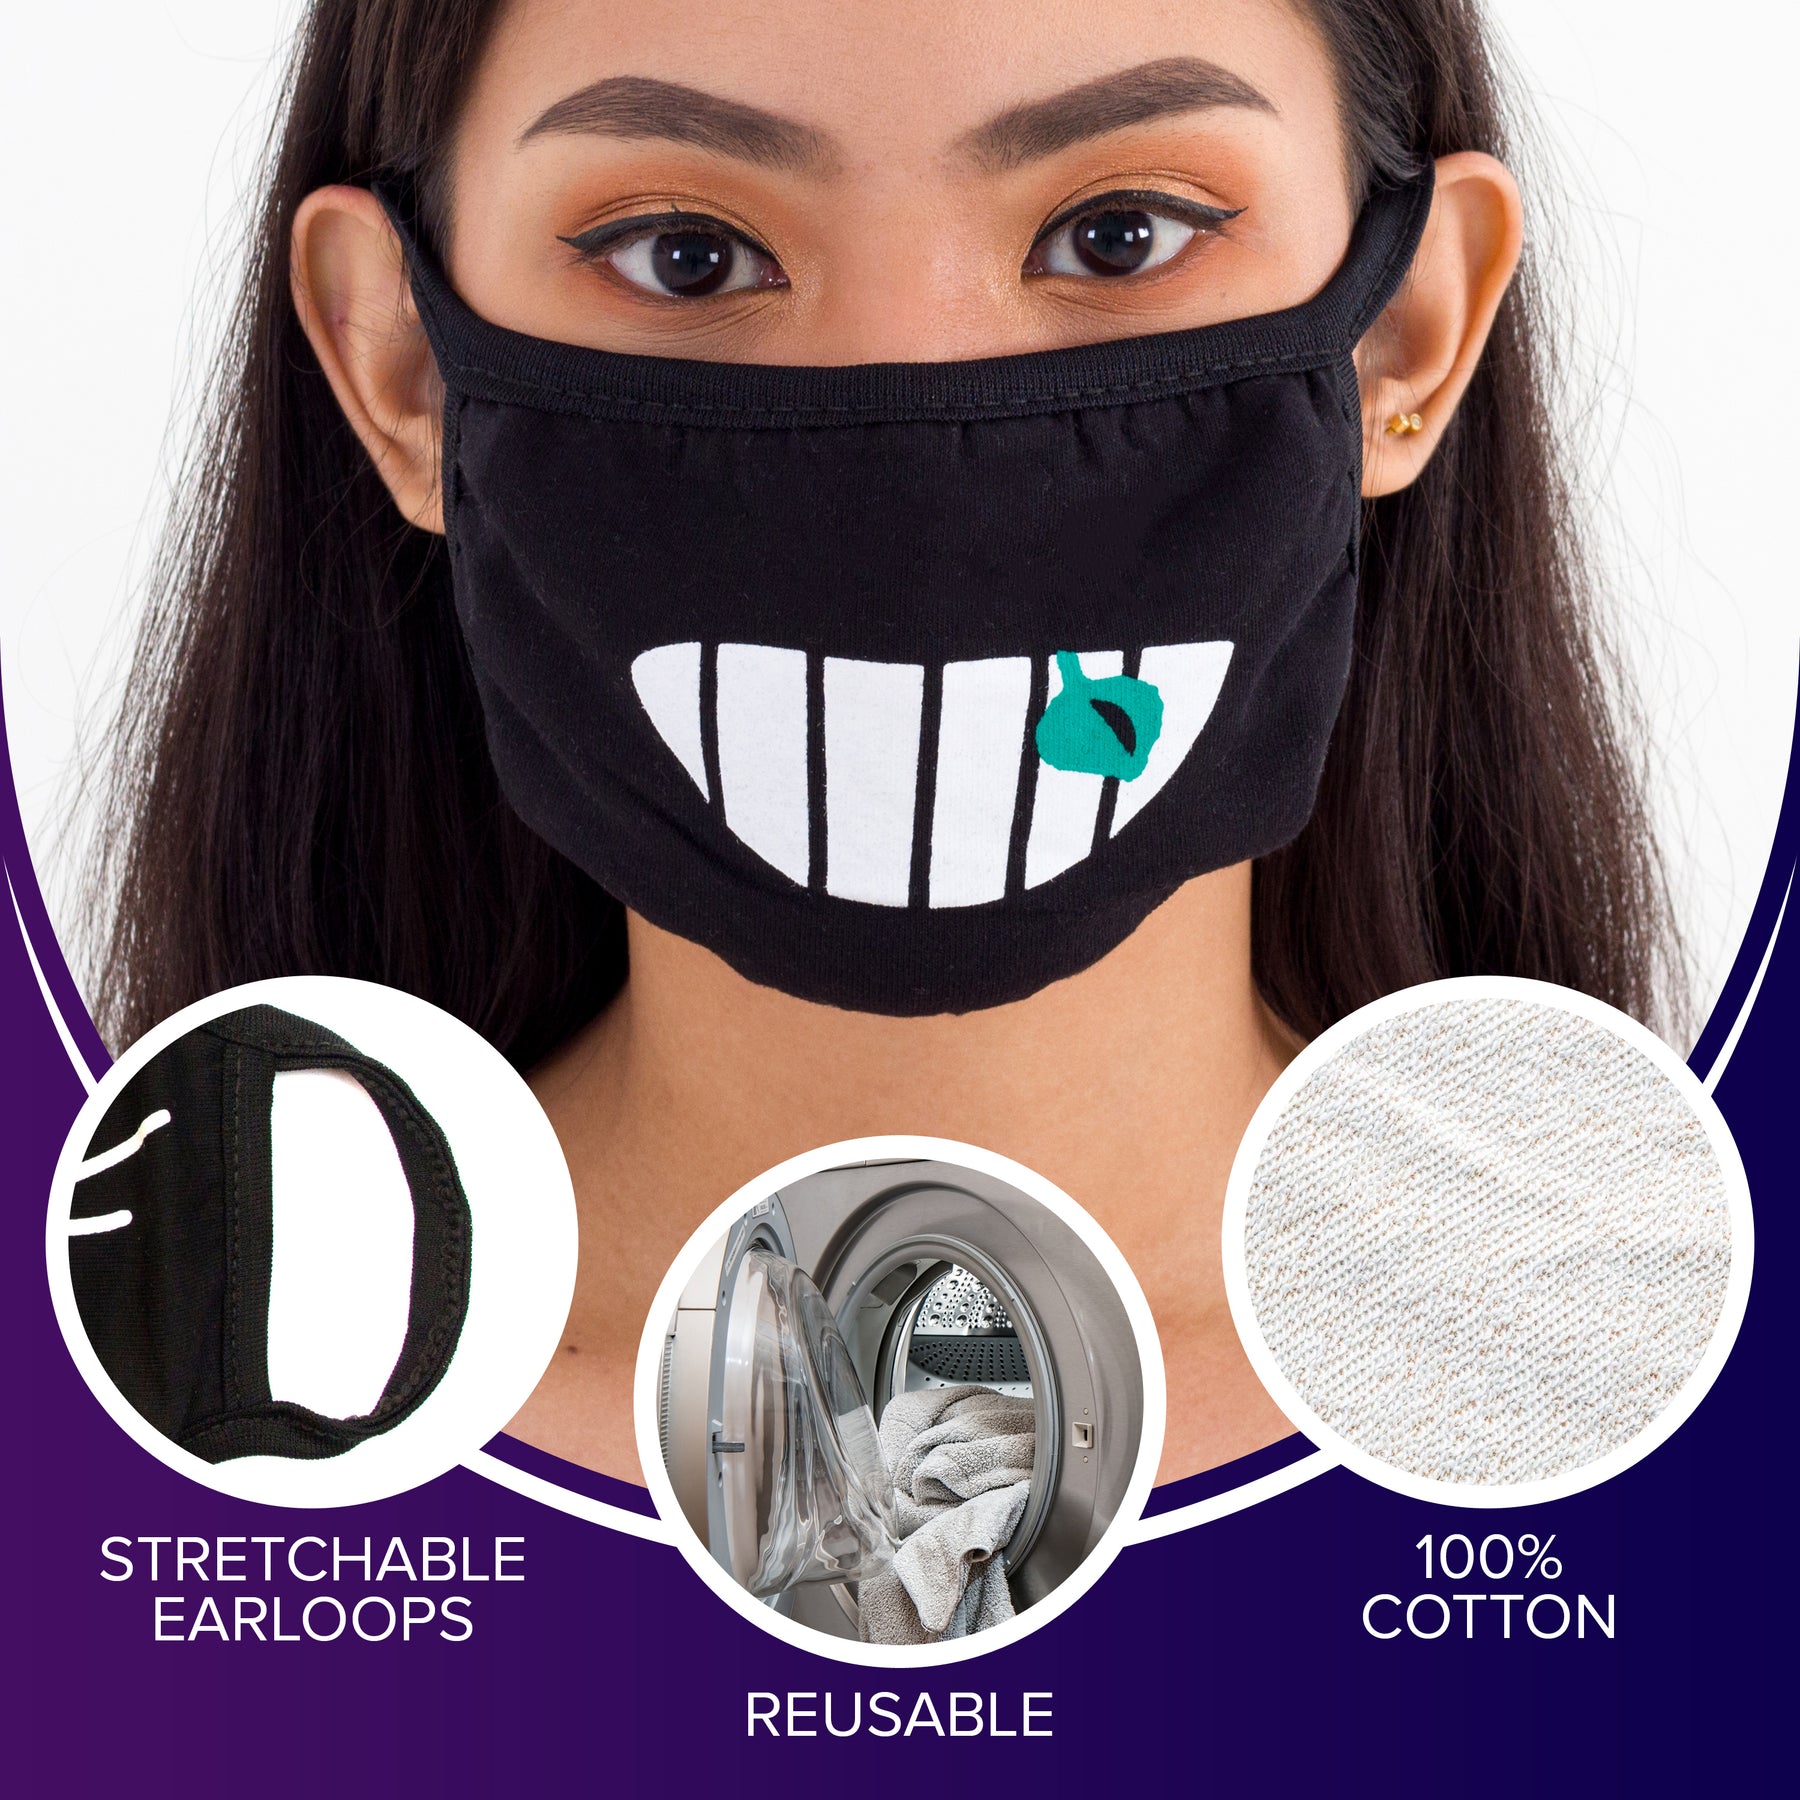 Face Masks (10 Pack) Black Cotton Mask - Adult Cute Anime Design - Cool Anti Dust Face Covering